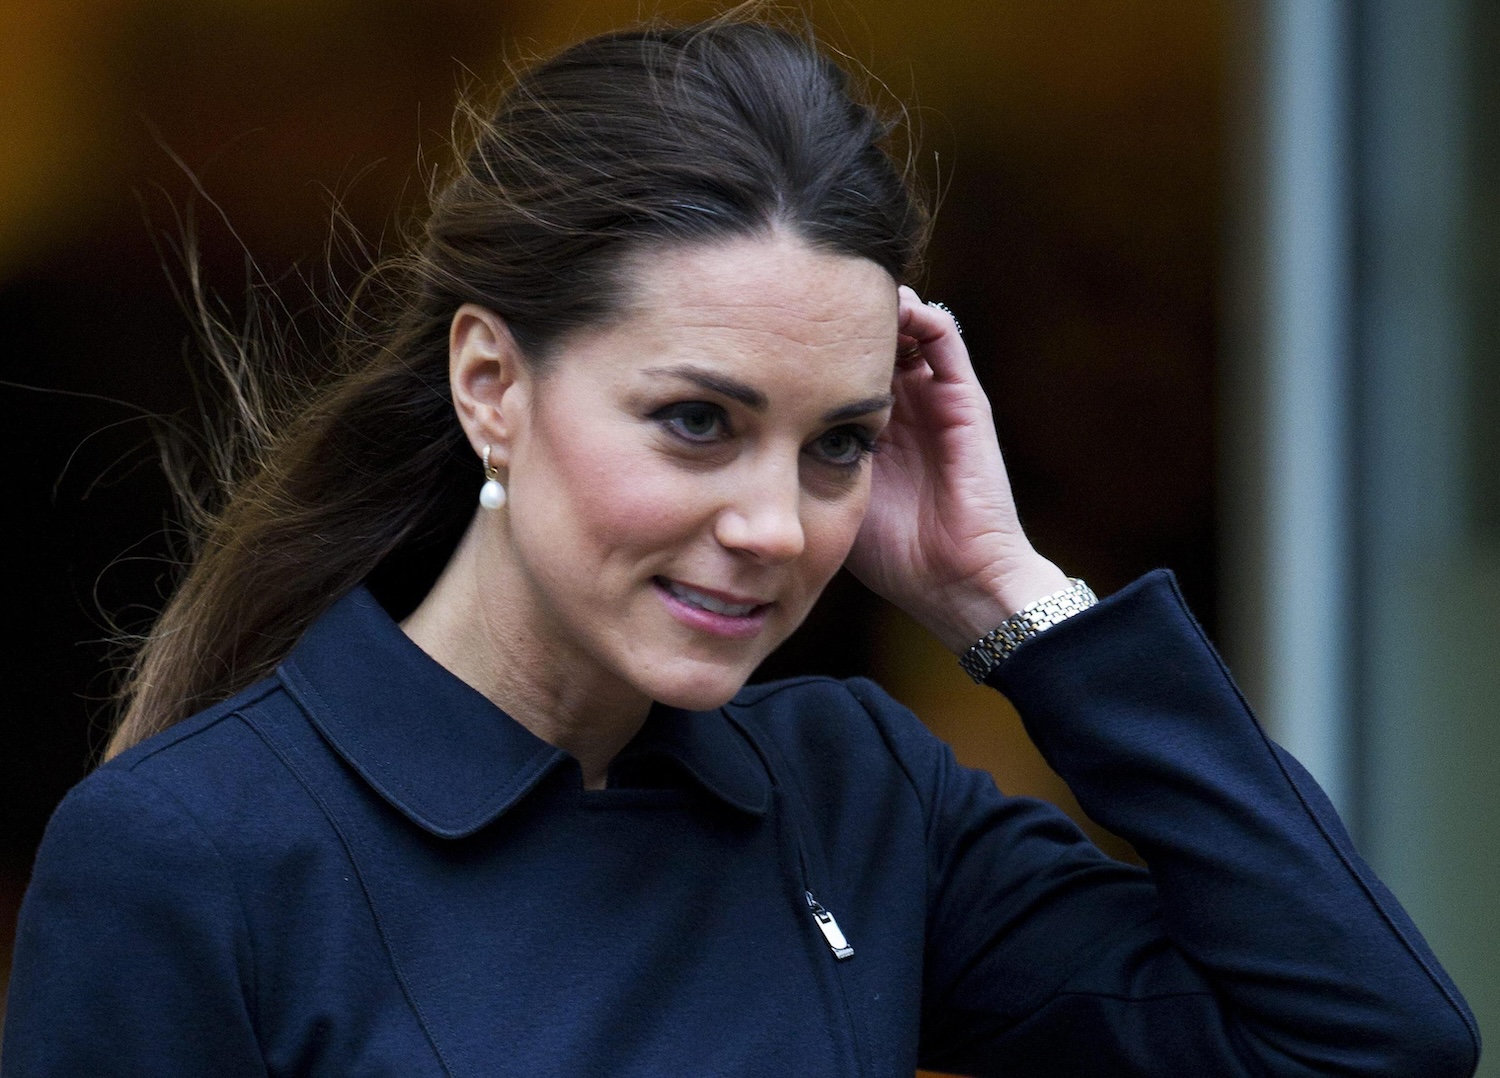 Kate Middleton tumor discovered after surgery: what we know about chemotherapy and its side effects